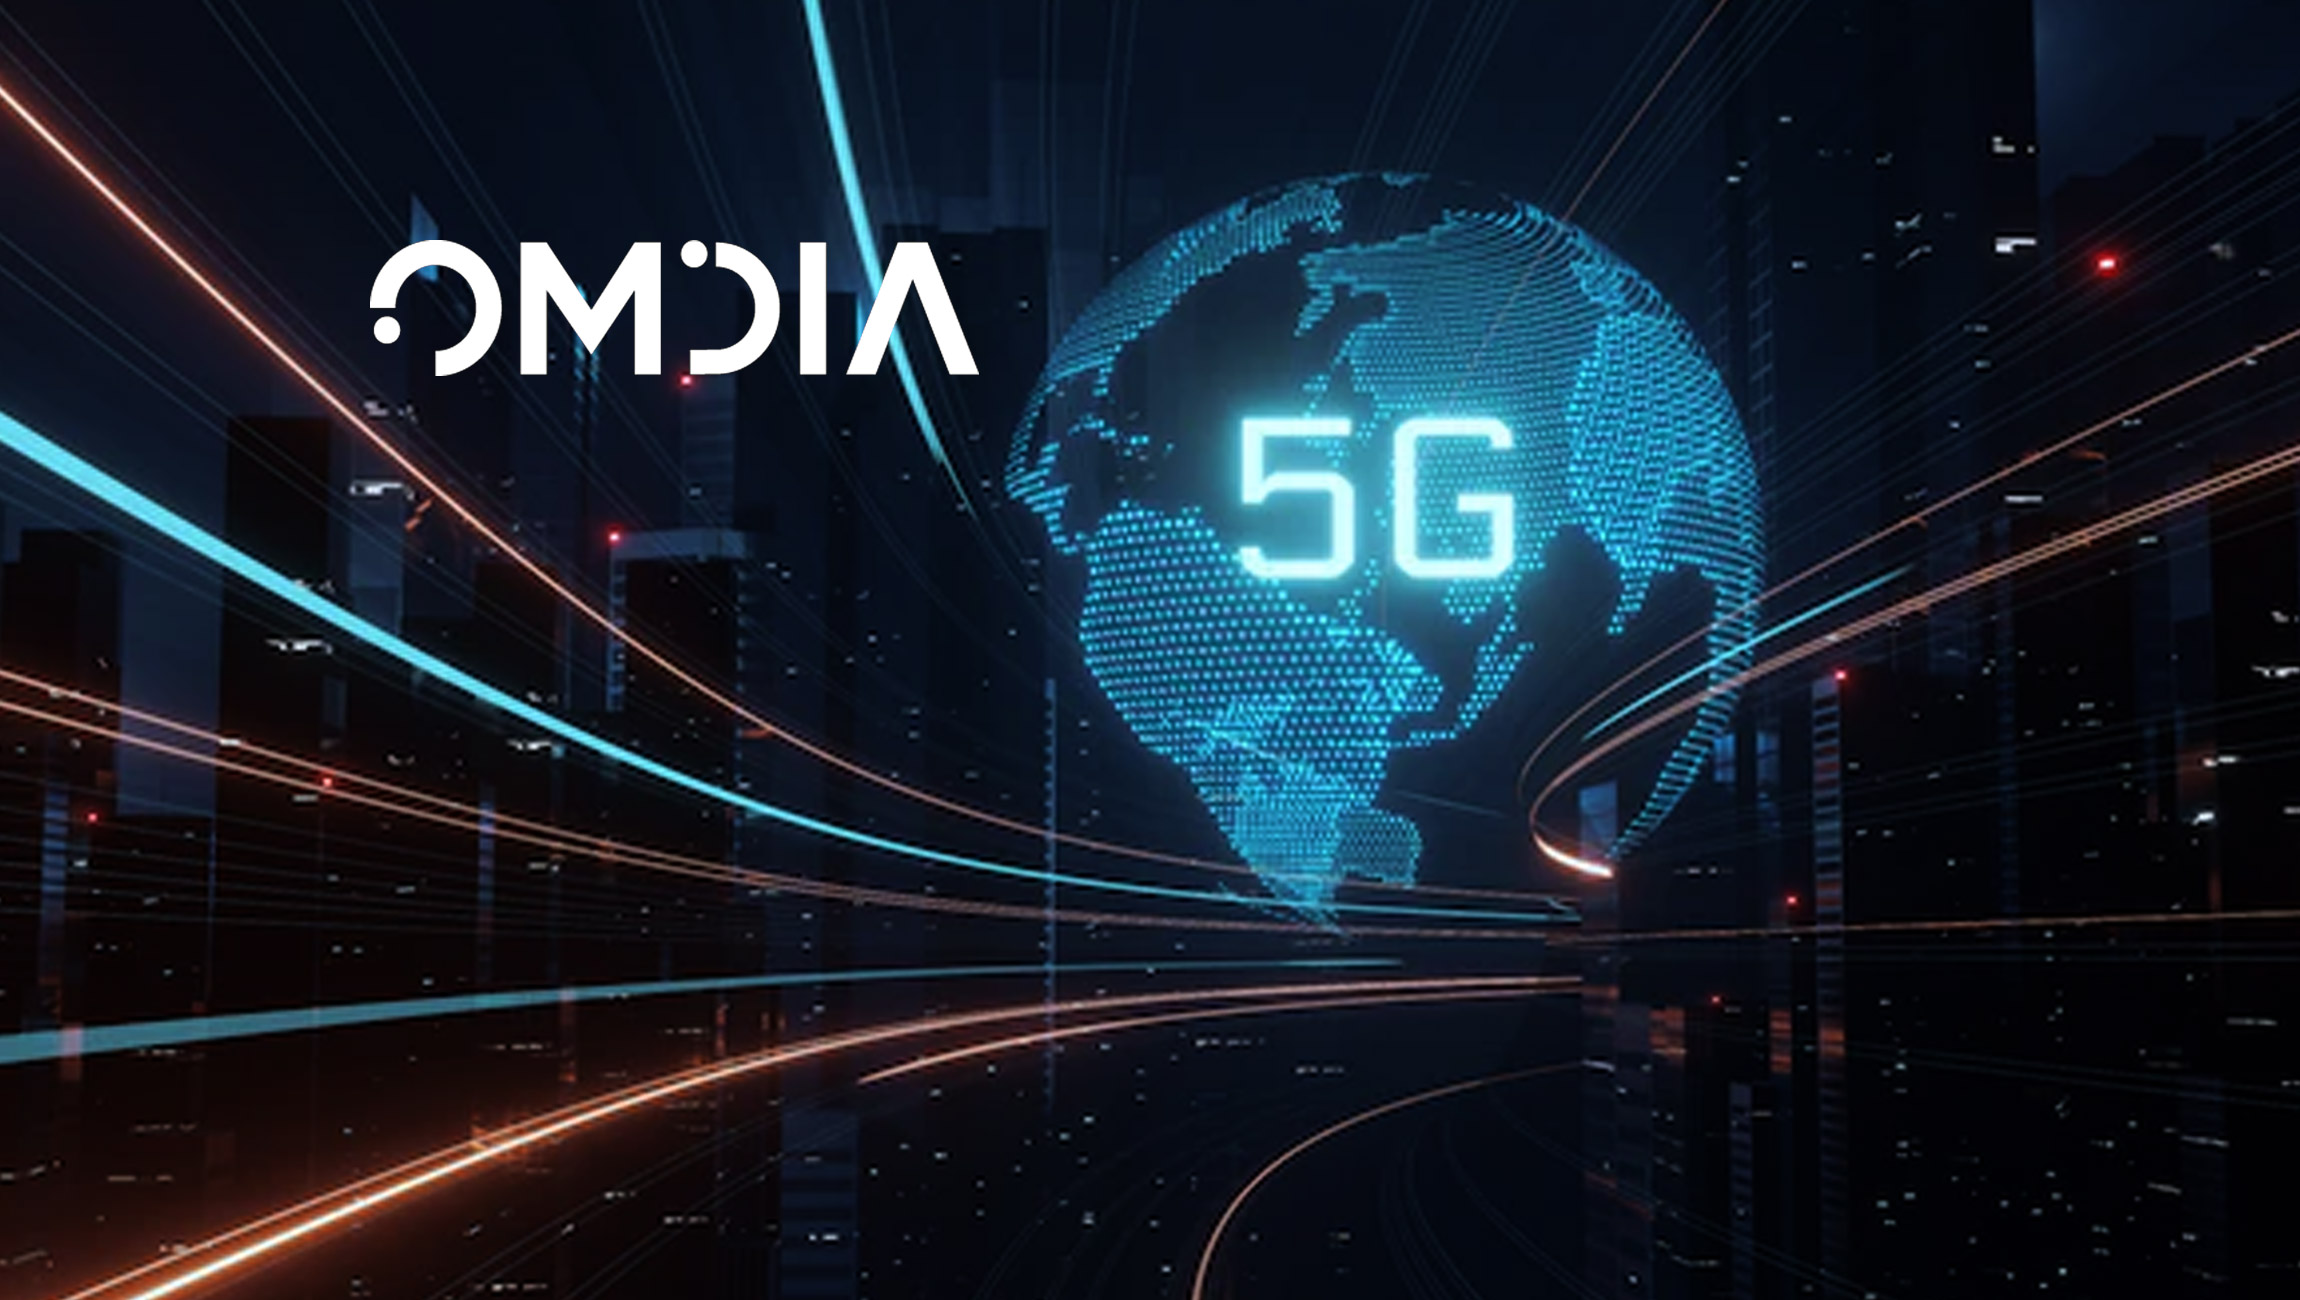 New-Omdia-research-finds-enterprises-are-turning-to-5G-for-their-IoT-needs